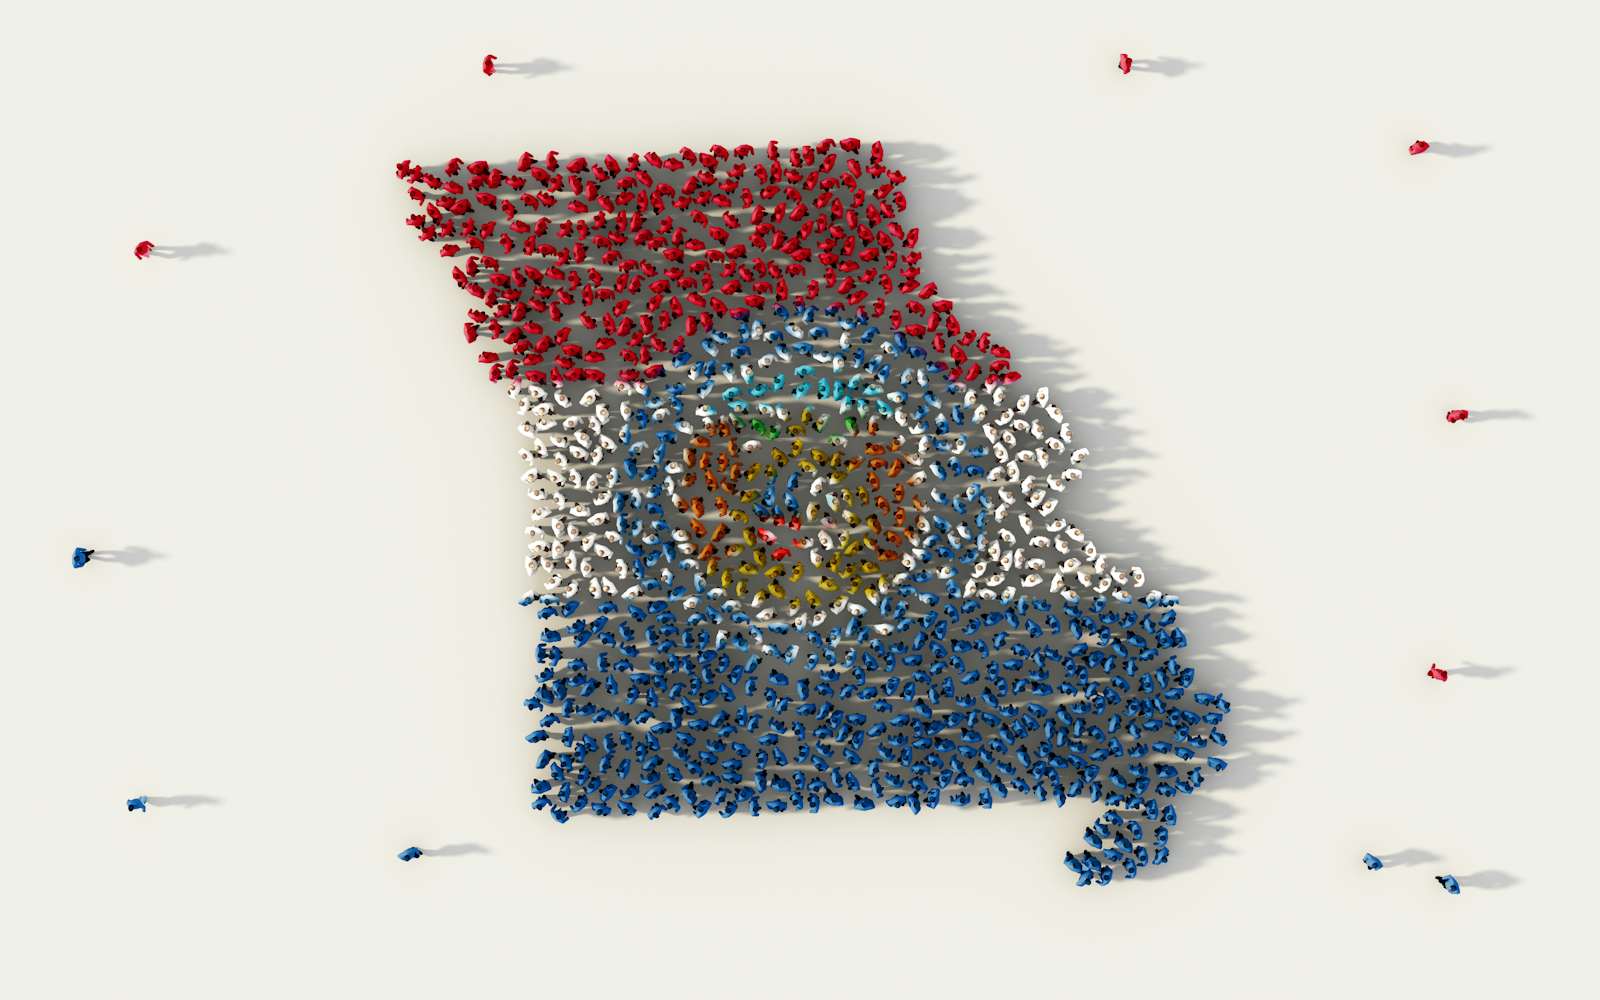 Large group of people forming the shape of Missouri